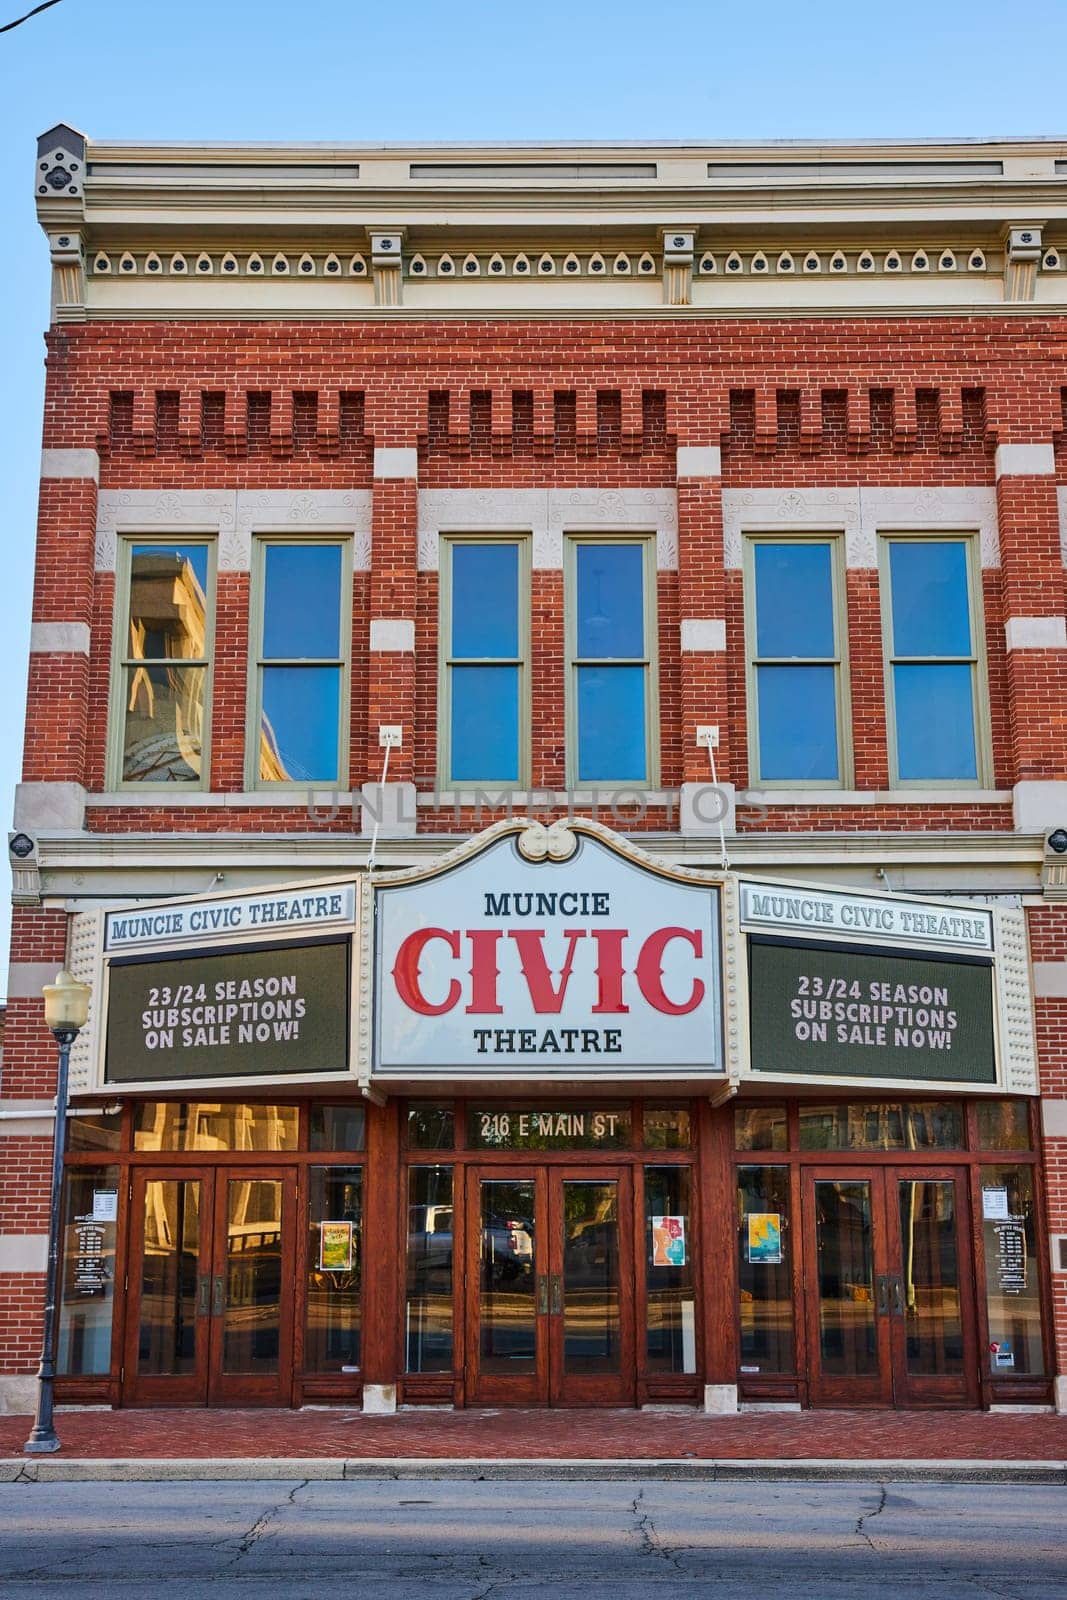 Historic Muncie Civic Theatre in downtown Indiana during late afternoon, showcasing classic American architecture and promoting the upcoming 23 24 Season.